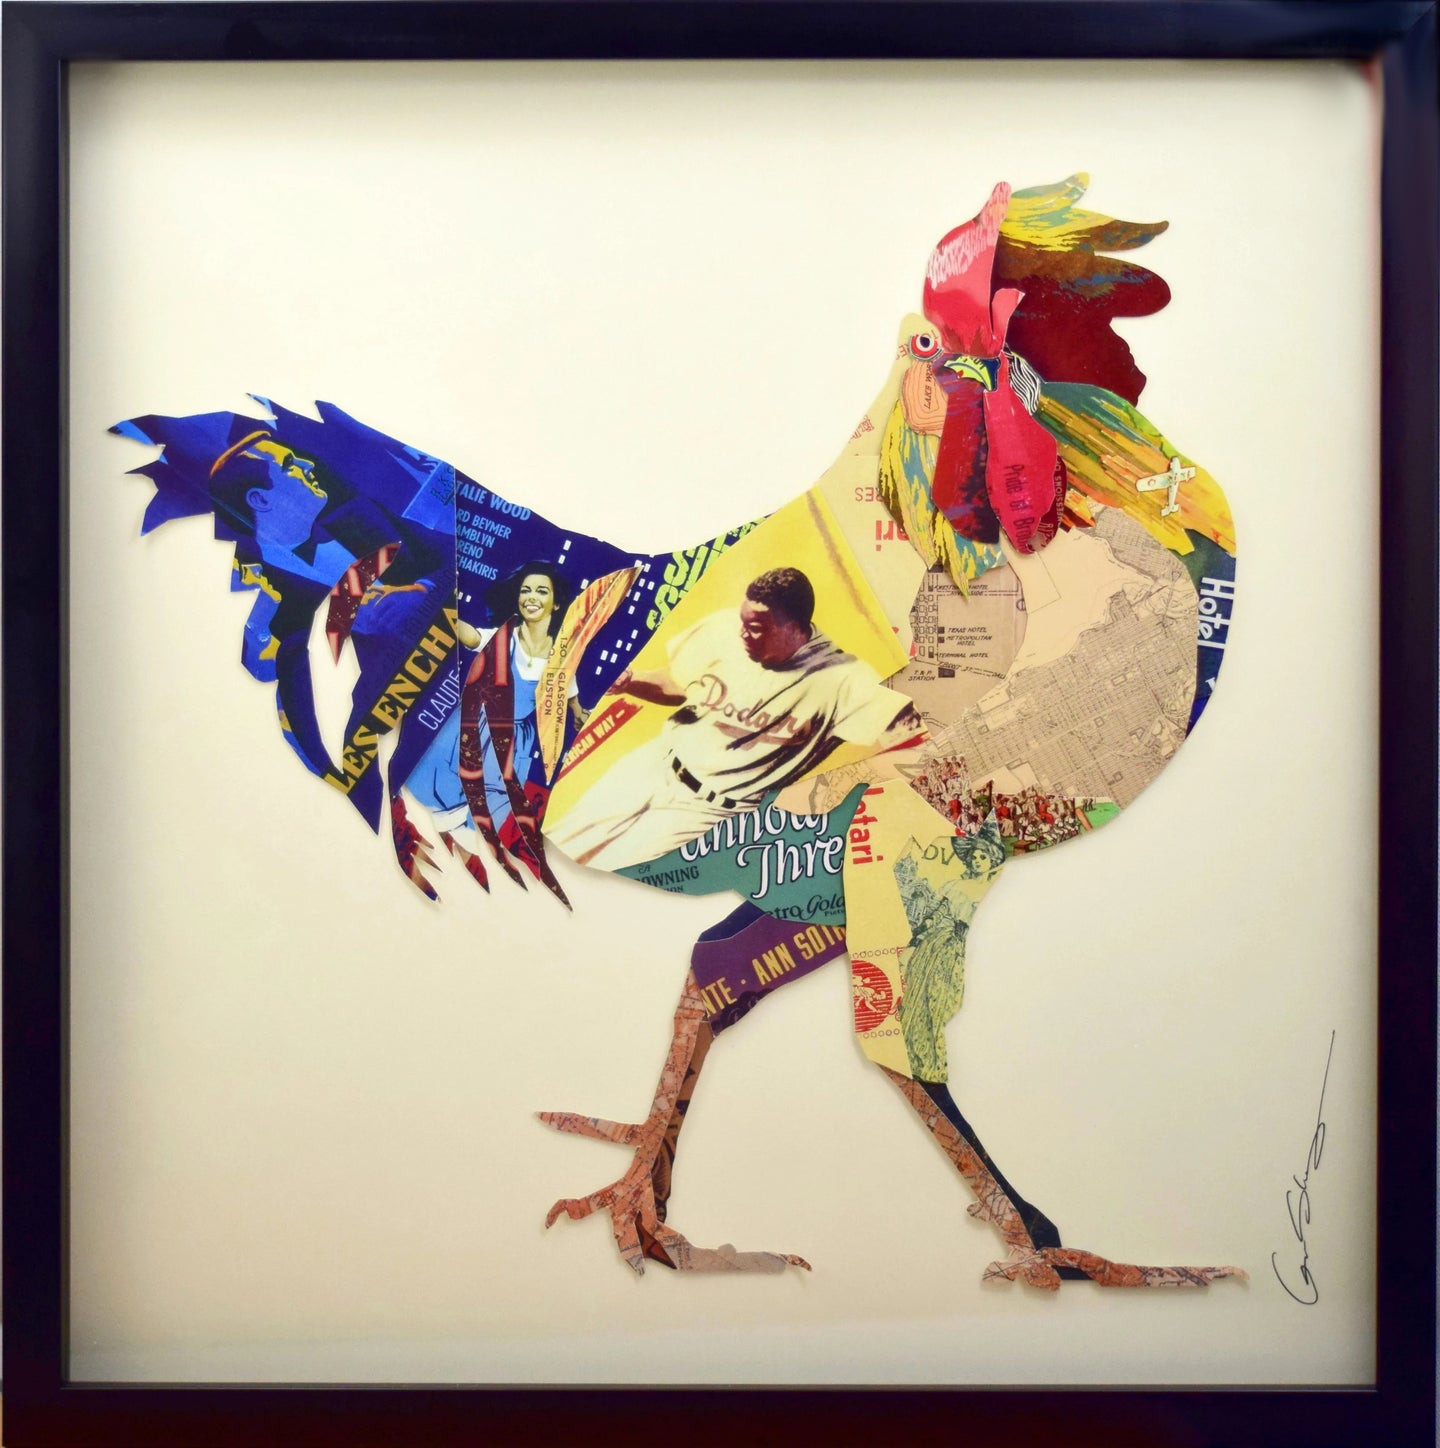 ROOGU The American Way 3D Art Collage Image Rooster Cock Breakfast Wall Picture Framed